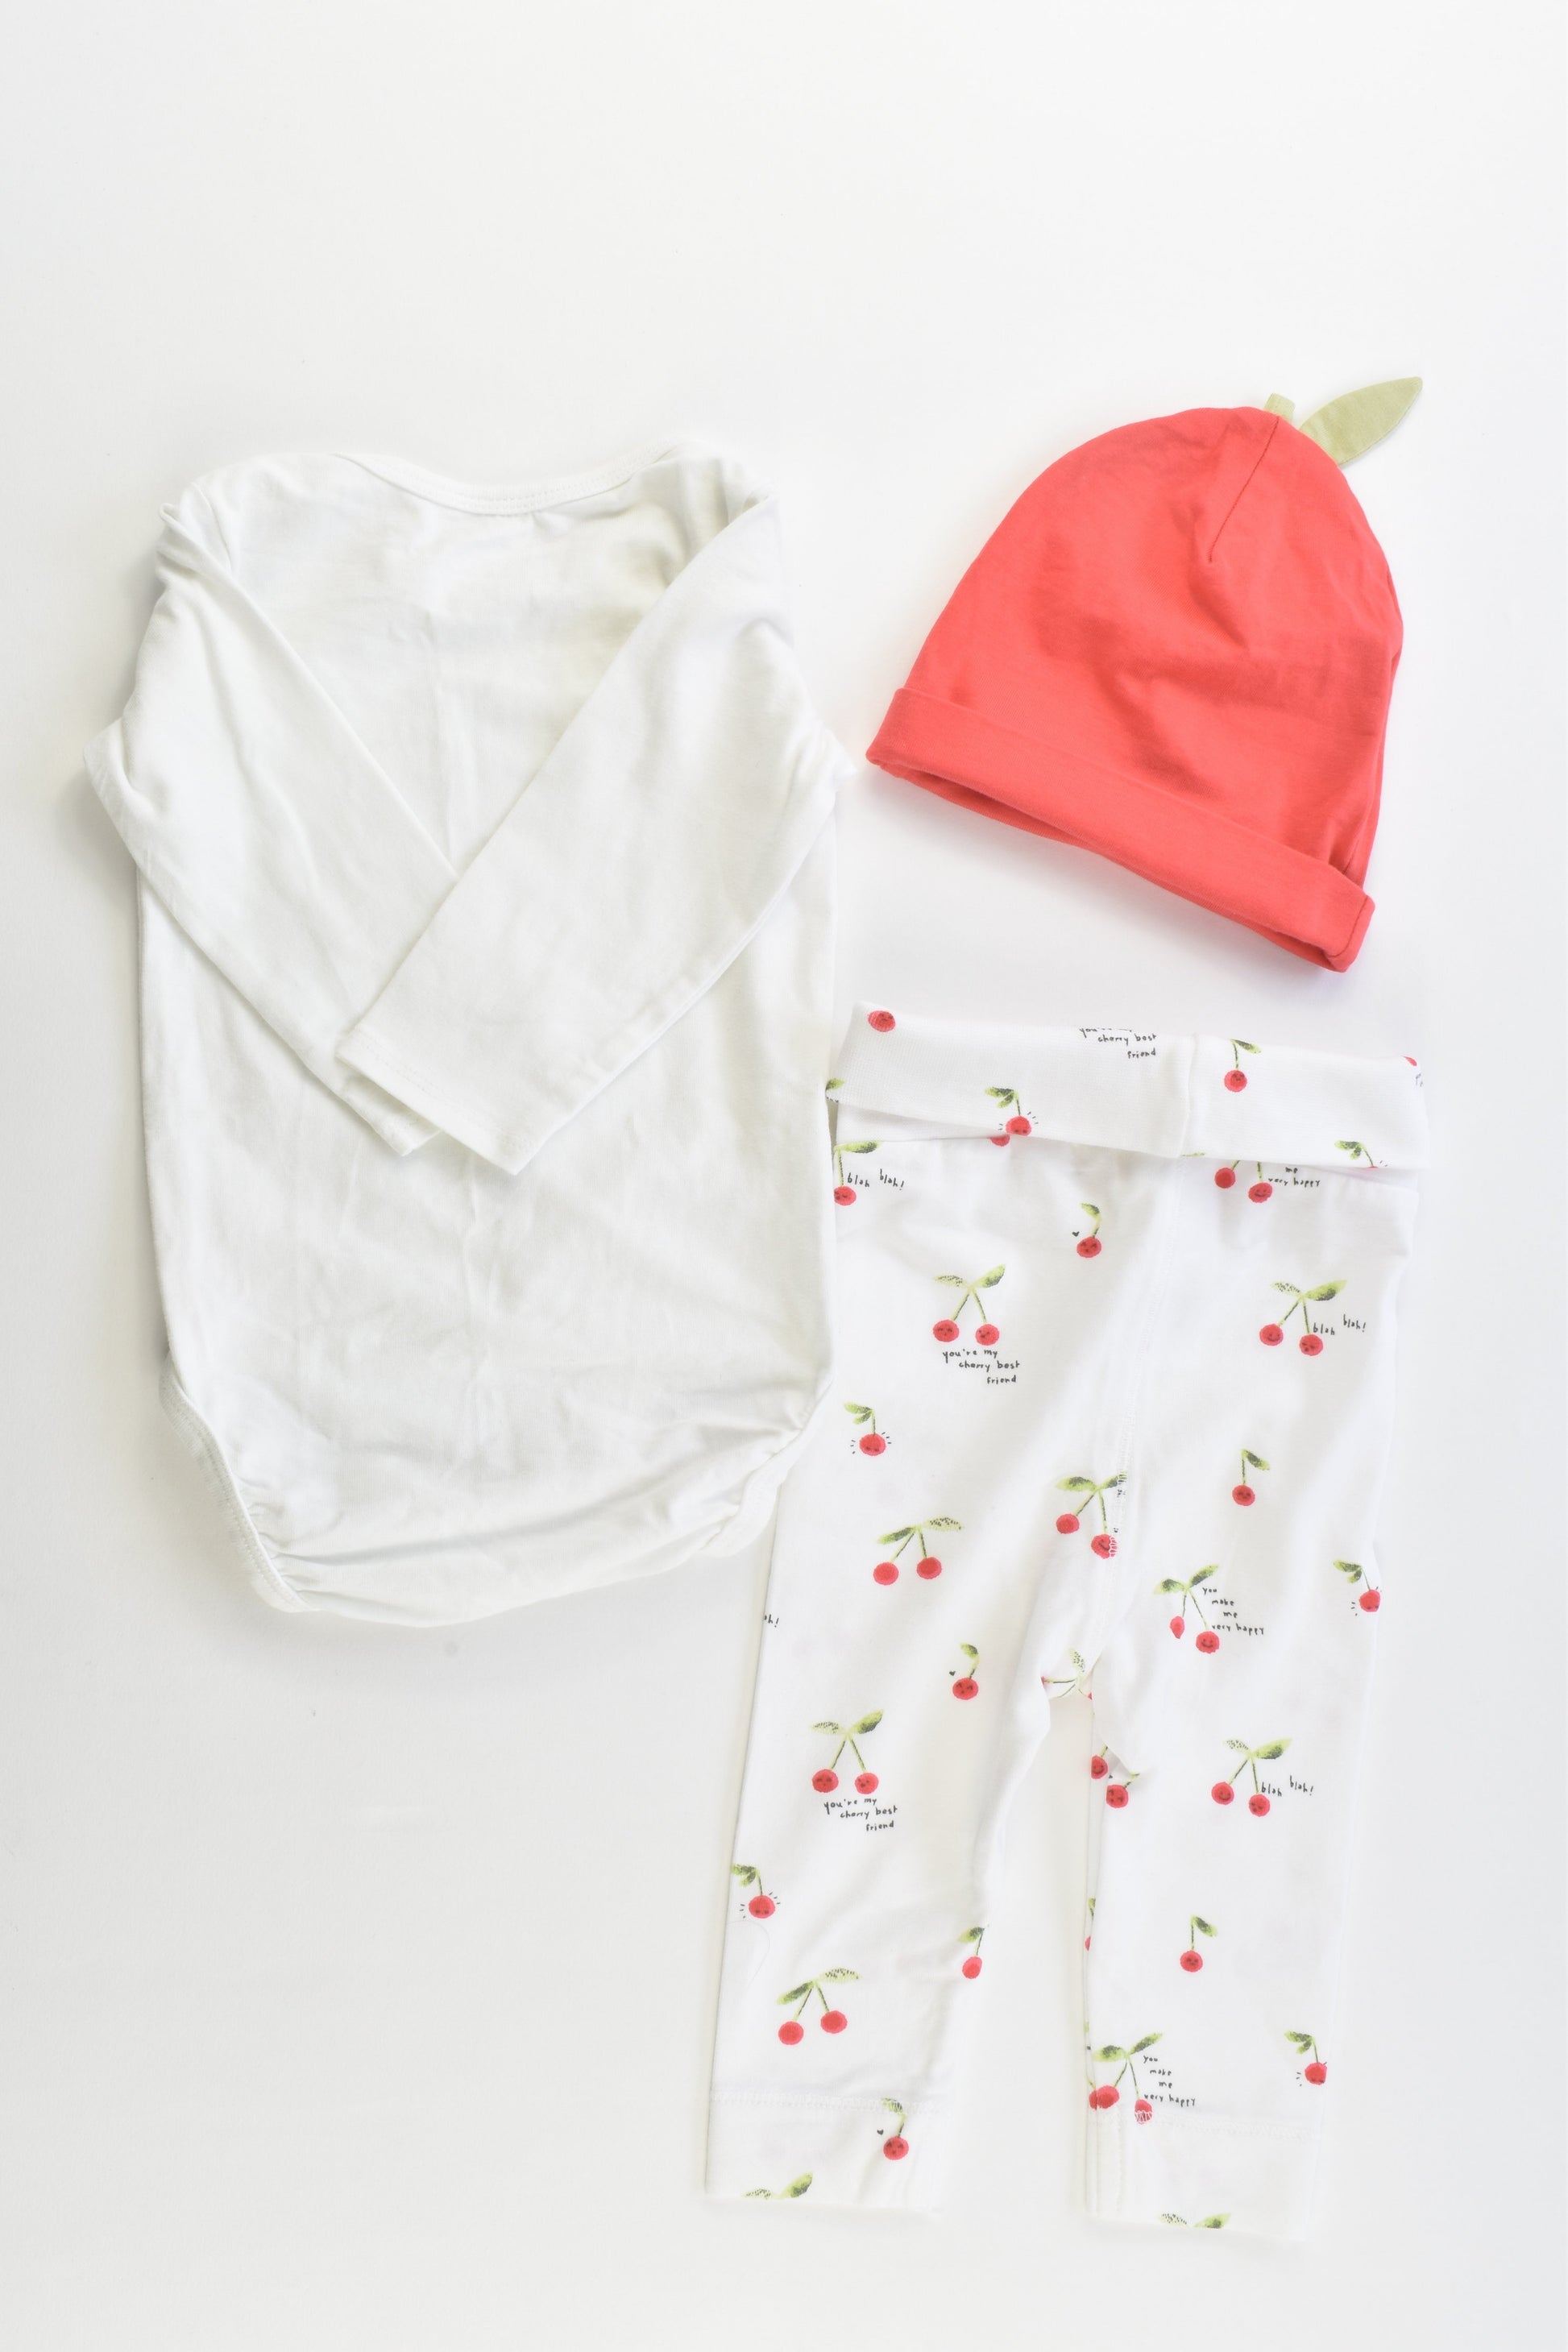 H&M Size 000 (62 cm) 'You Are My Cherry Best Friend' Outfit